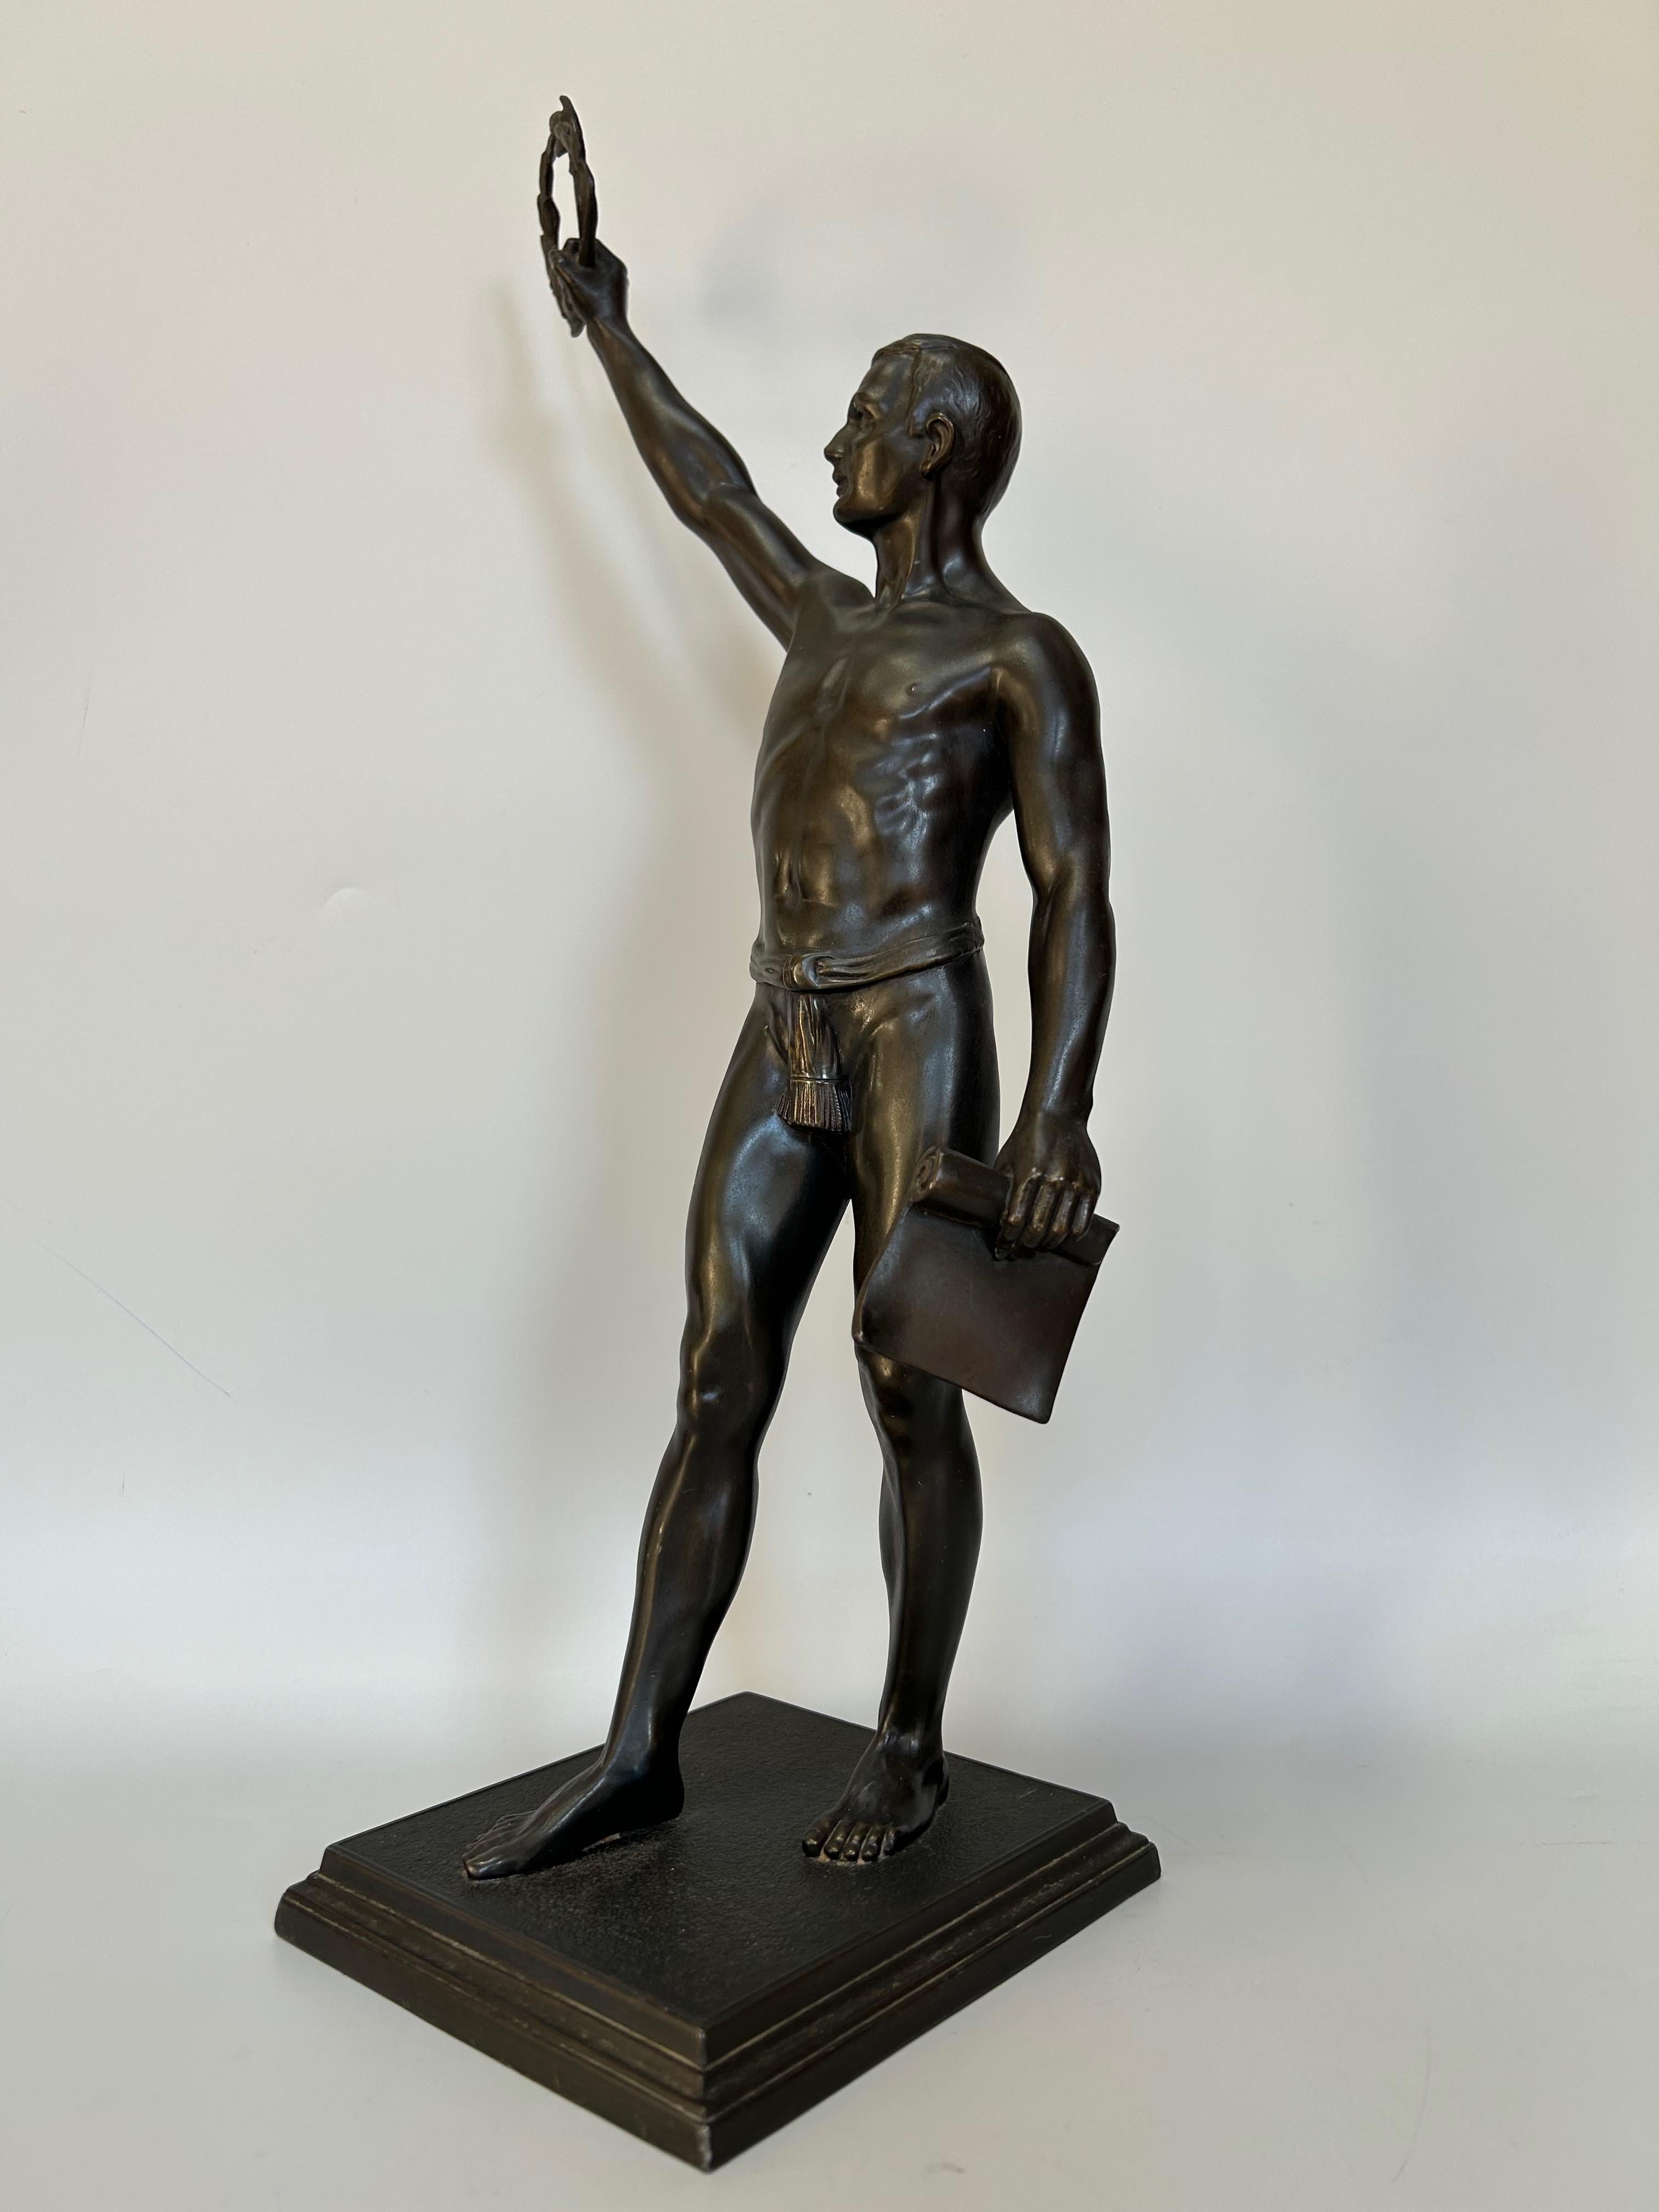 Art deco sculpture circa 1920 in spelter.
The Olympic Salute probably published in 1924 for the Olympic Games.
Very beautiful bronze patina and good quality of execution.

Length: 14,5 cm
Width: 13 cm
Height: 44,5 cm
Weight: 3 KG